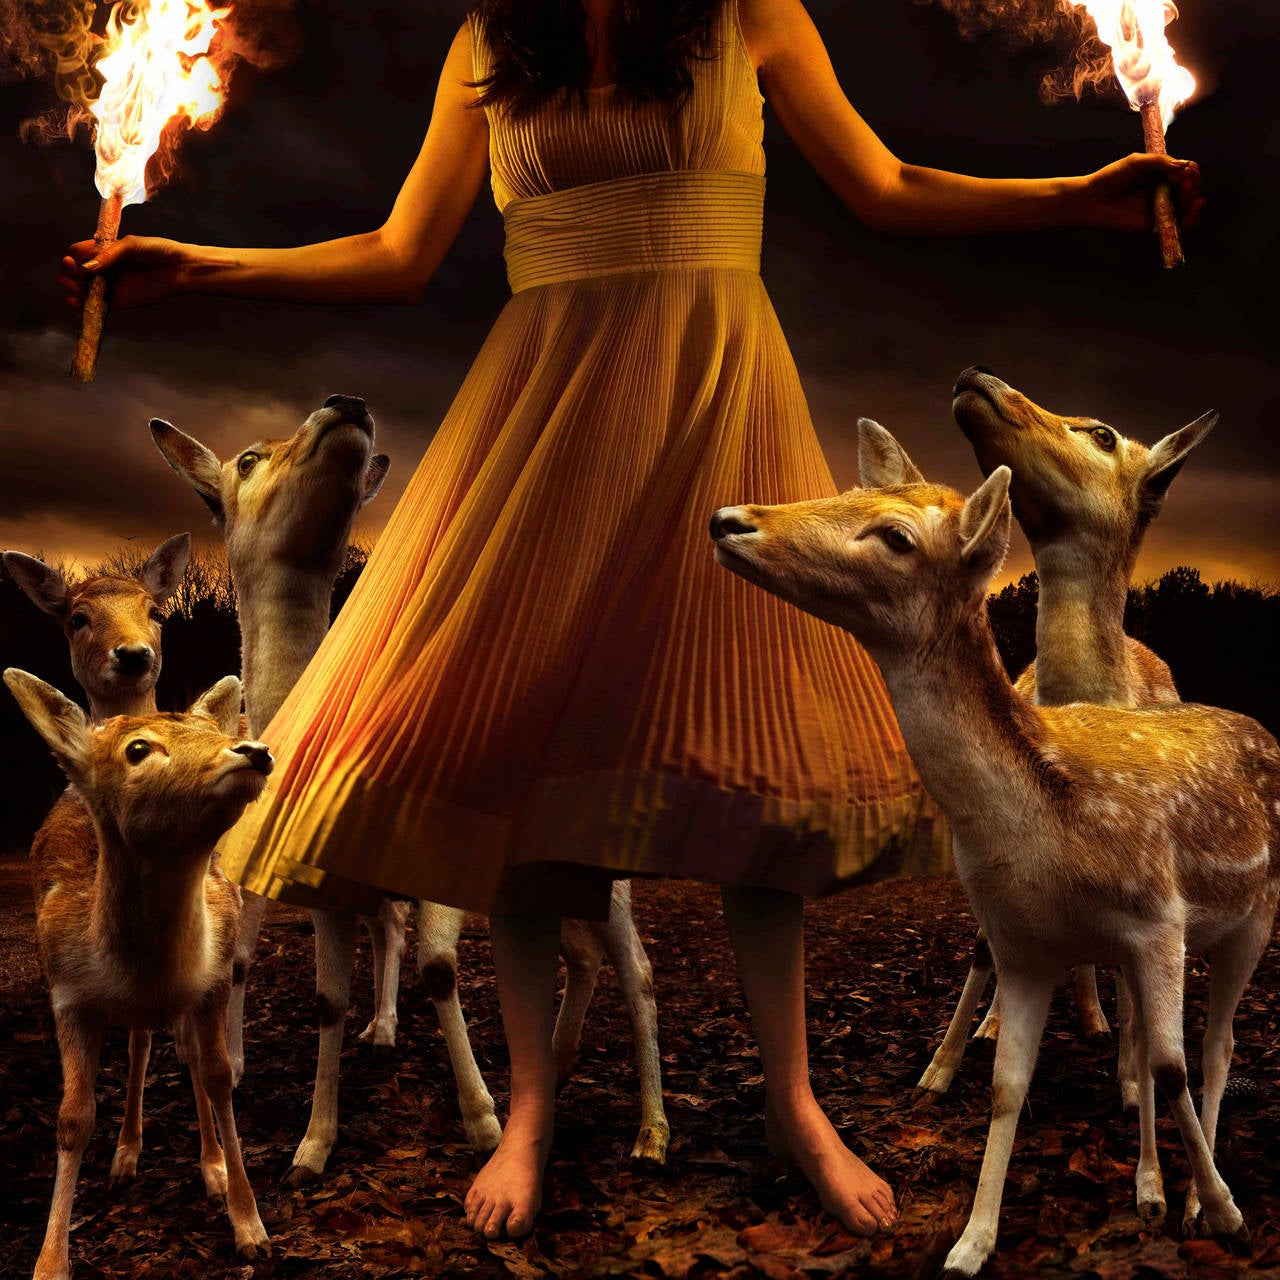 Burn to Shine, limited edition photograph, archival pigment, signed and numbered